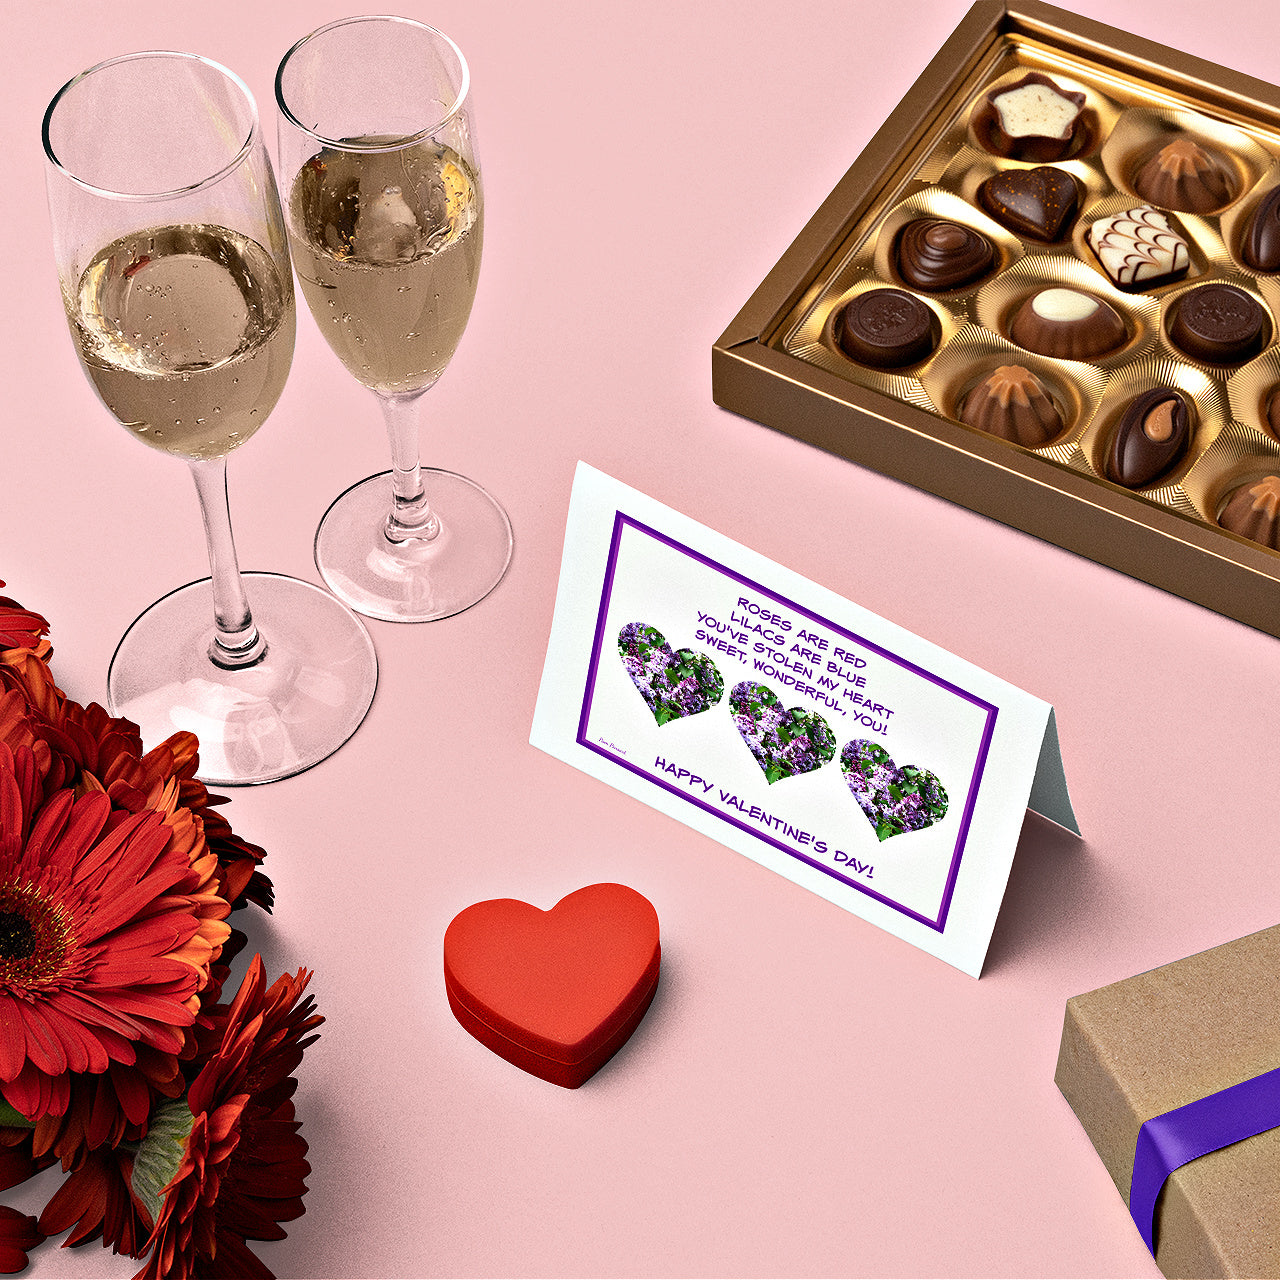 Mock up of the card surrounded by a box of chocolates, red flowers and glasses of a bubbly beverage